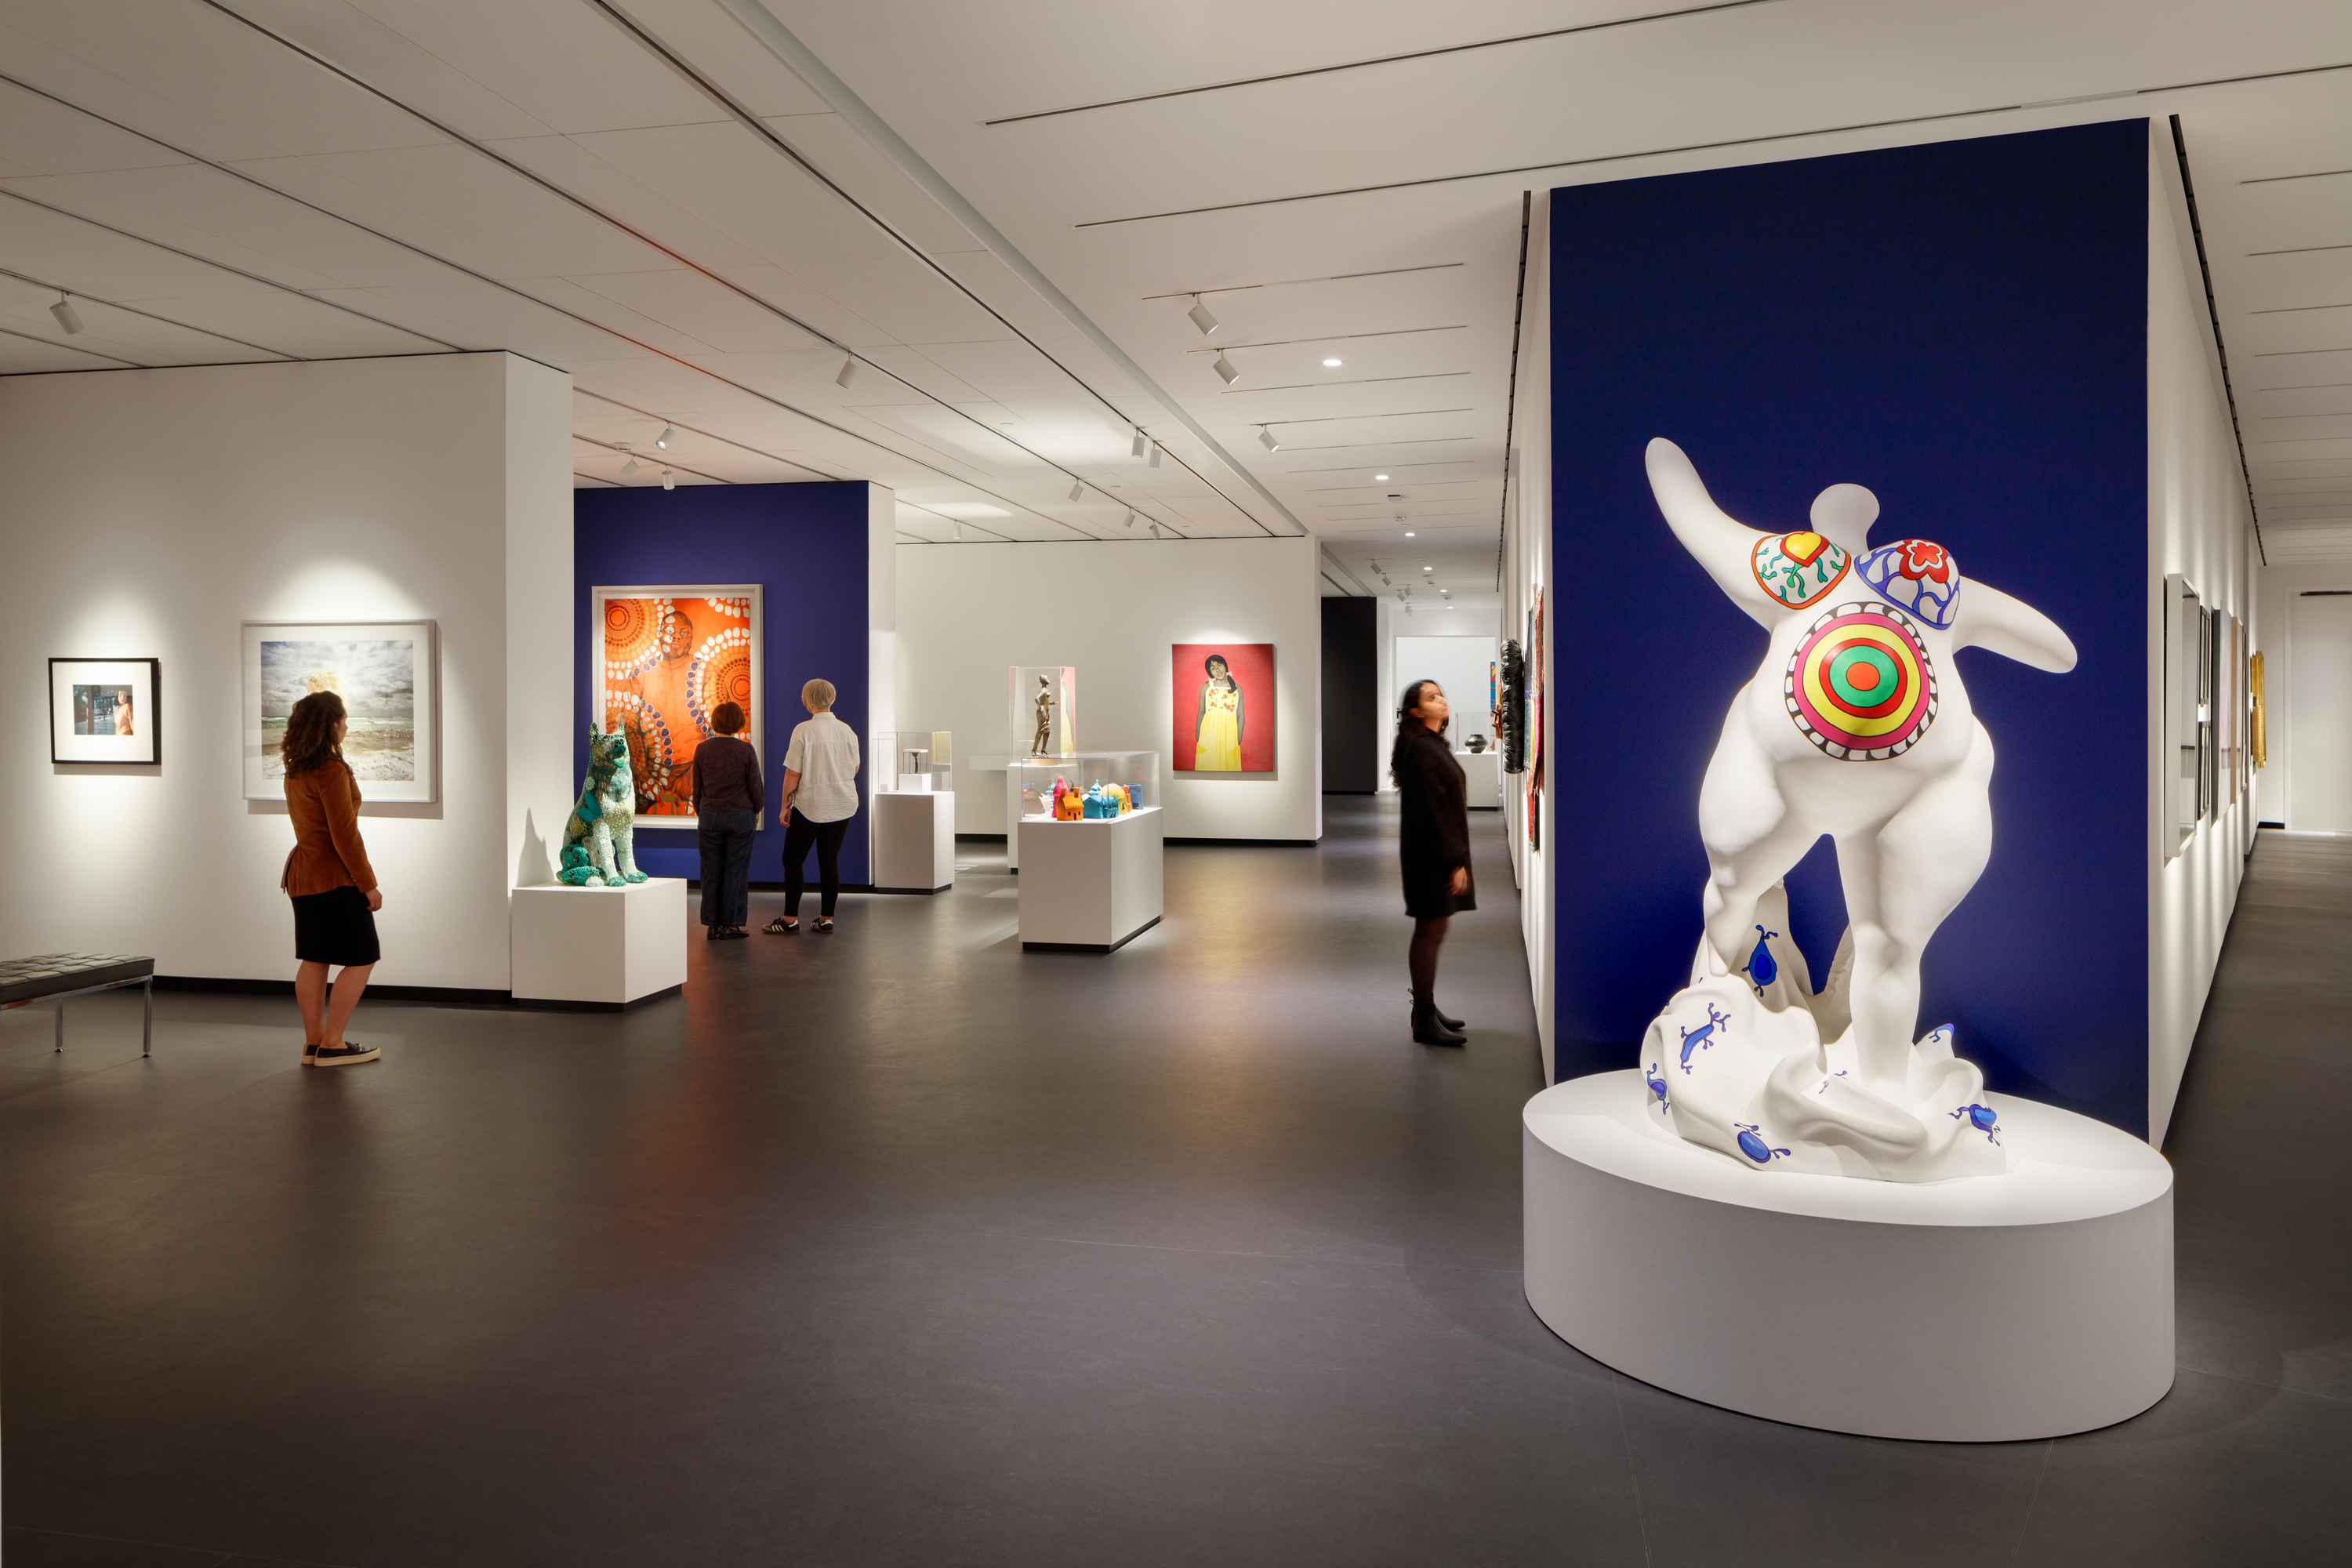 A modern museum gallery is photographed at a wide angle. It features several inset bays in which art of various sizes and mediums is hung. In the foreground, a marble sculpture depicts an abstracted, voluptuous figure with a pregnant belly. The figure is covered in bright patterns and posed stepping forward, with raised, outstretched arms.